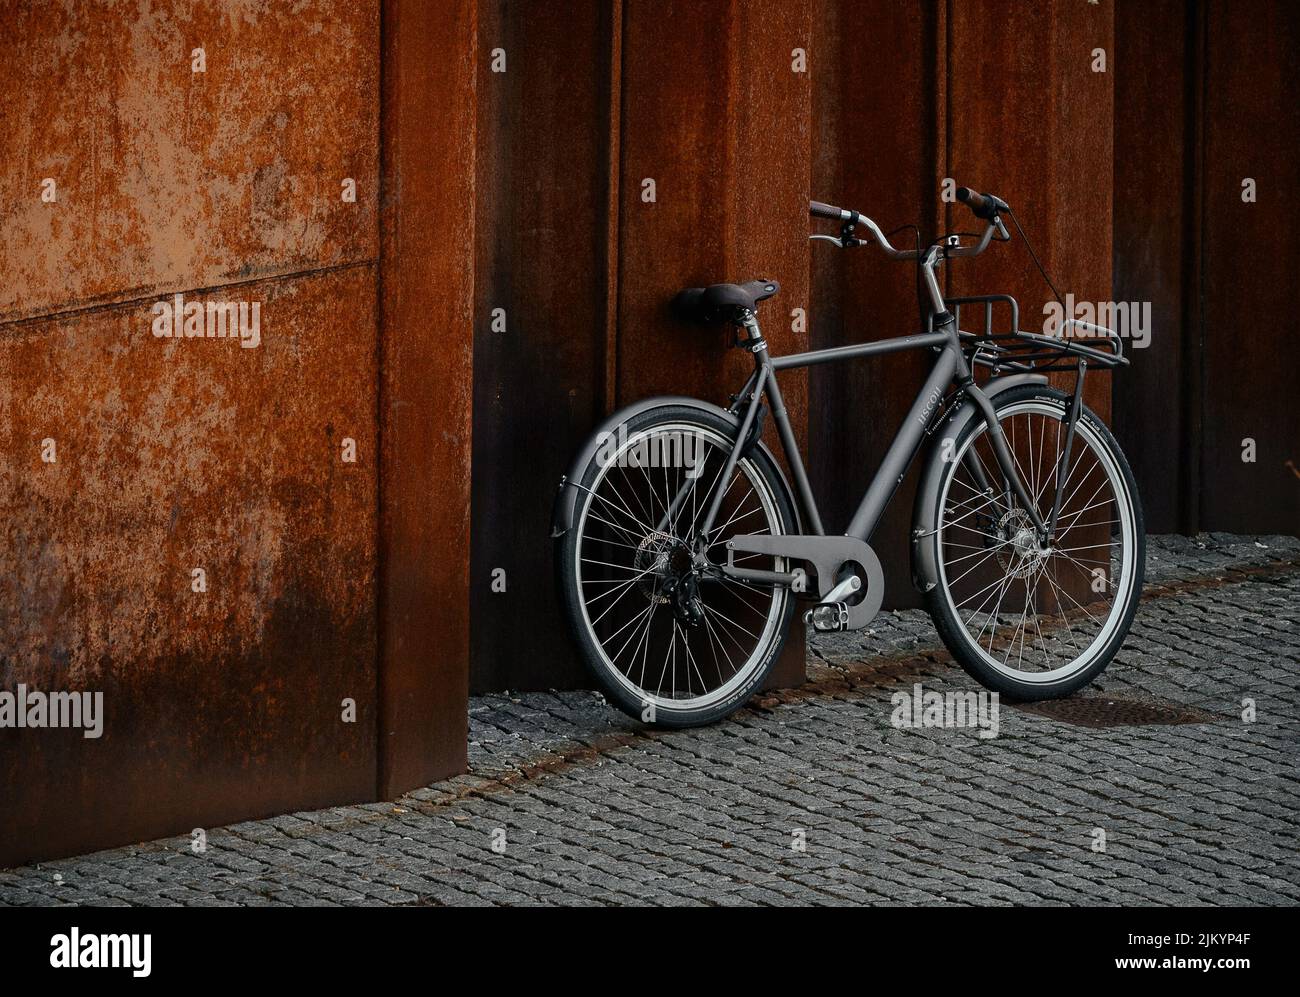 A bicycle parked on the wooden wall outdoors on the textured ground Stock Photo